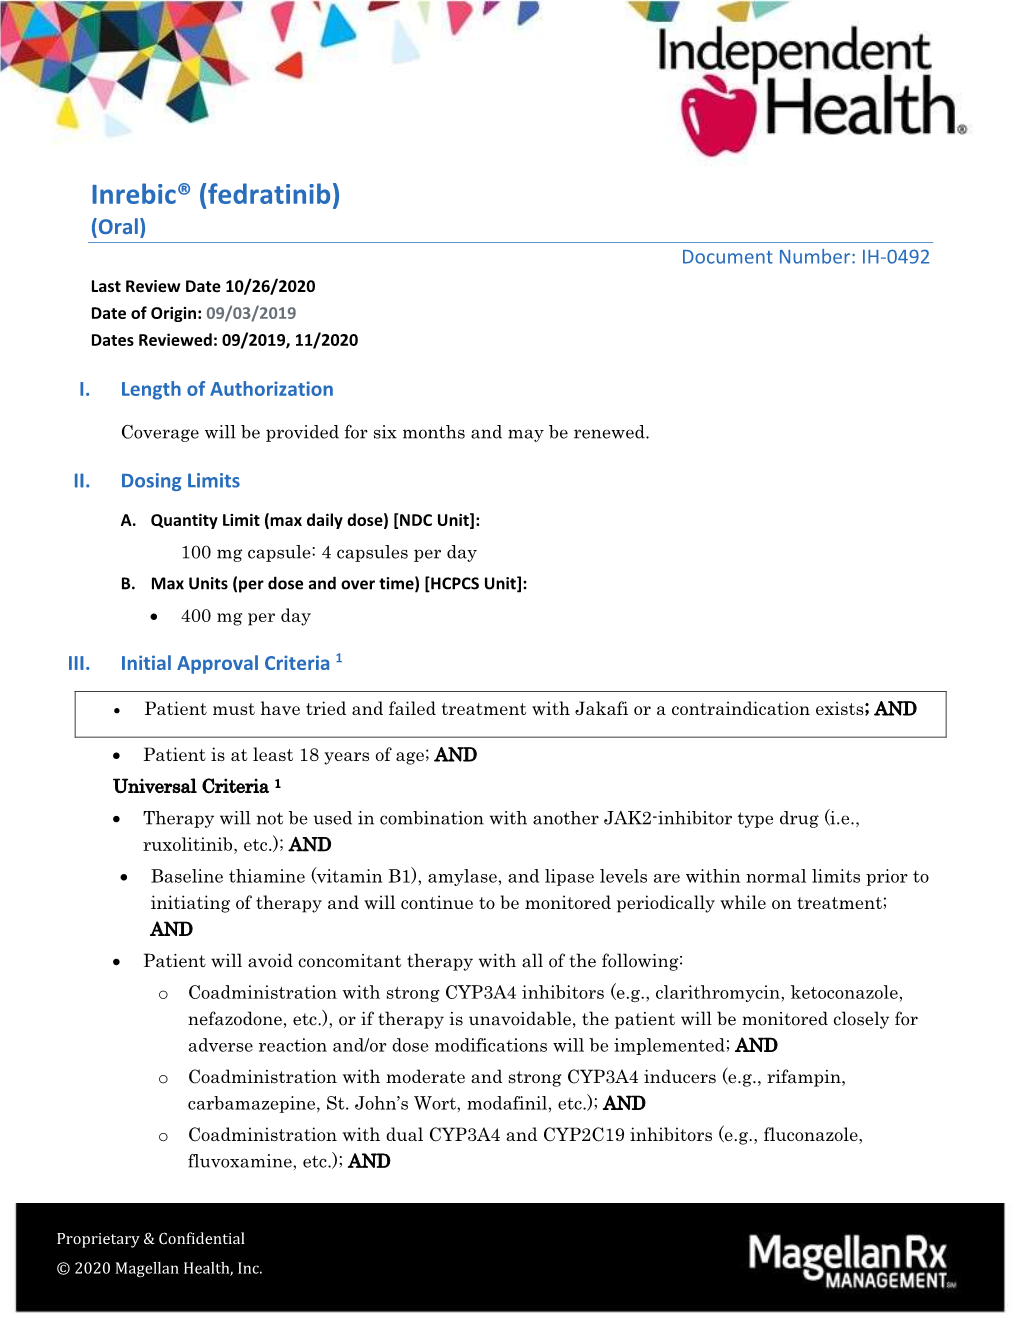 Inrebic® (Fedratinib) (Oral) Document Number: IH-0492 Last Review Date 10/26/2020 Date of Origin: 09/03/2019 Dates Reviewed: 09/2019, 11/2020